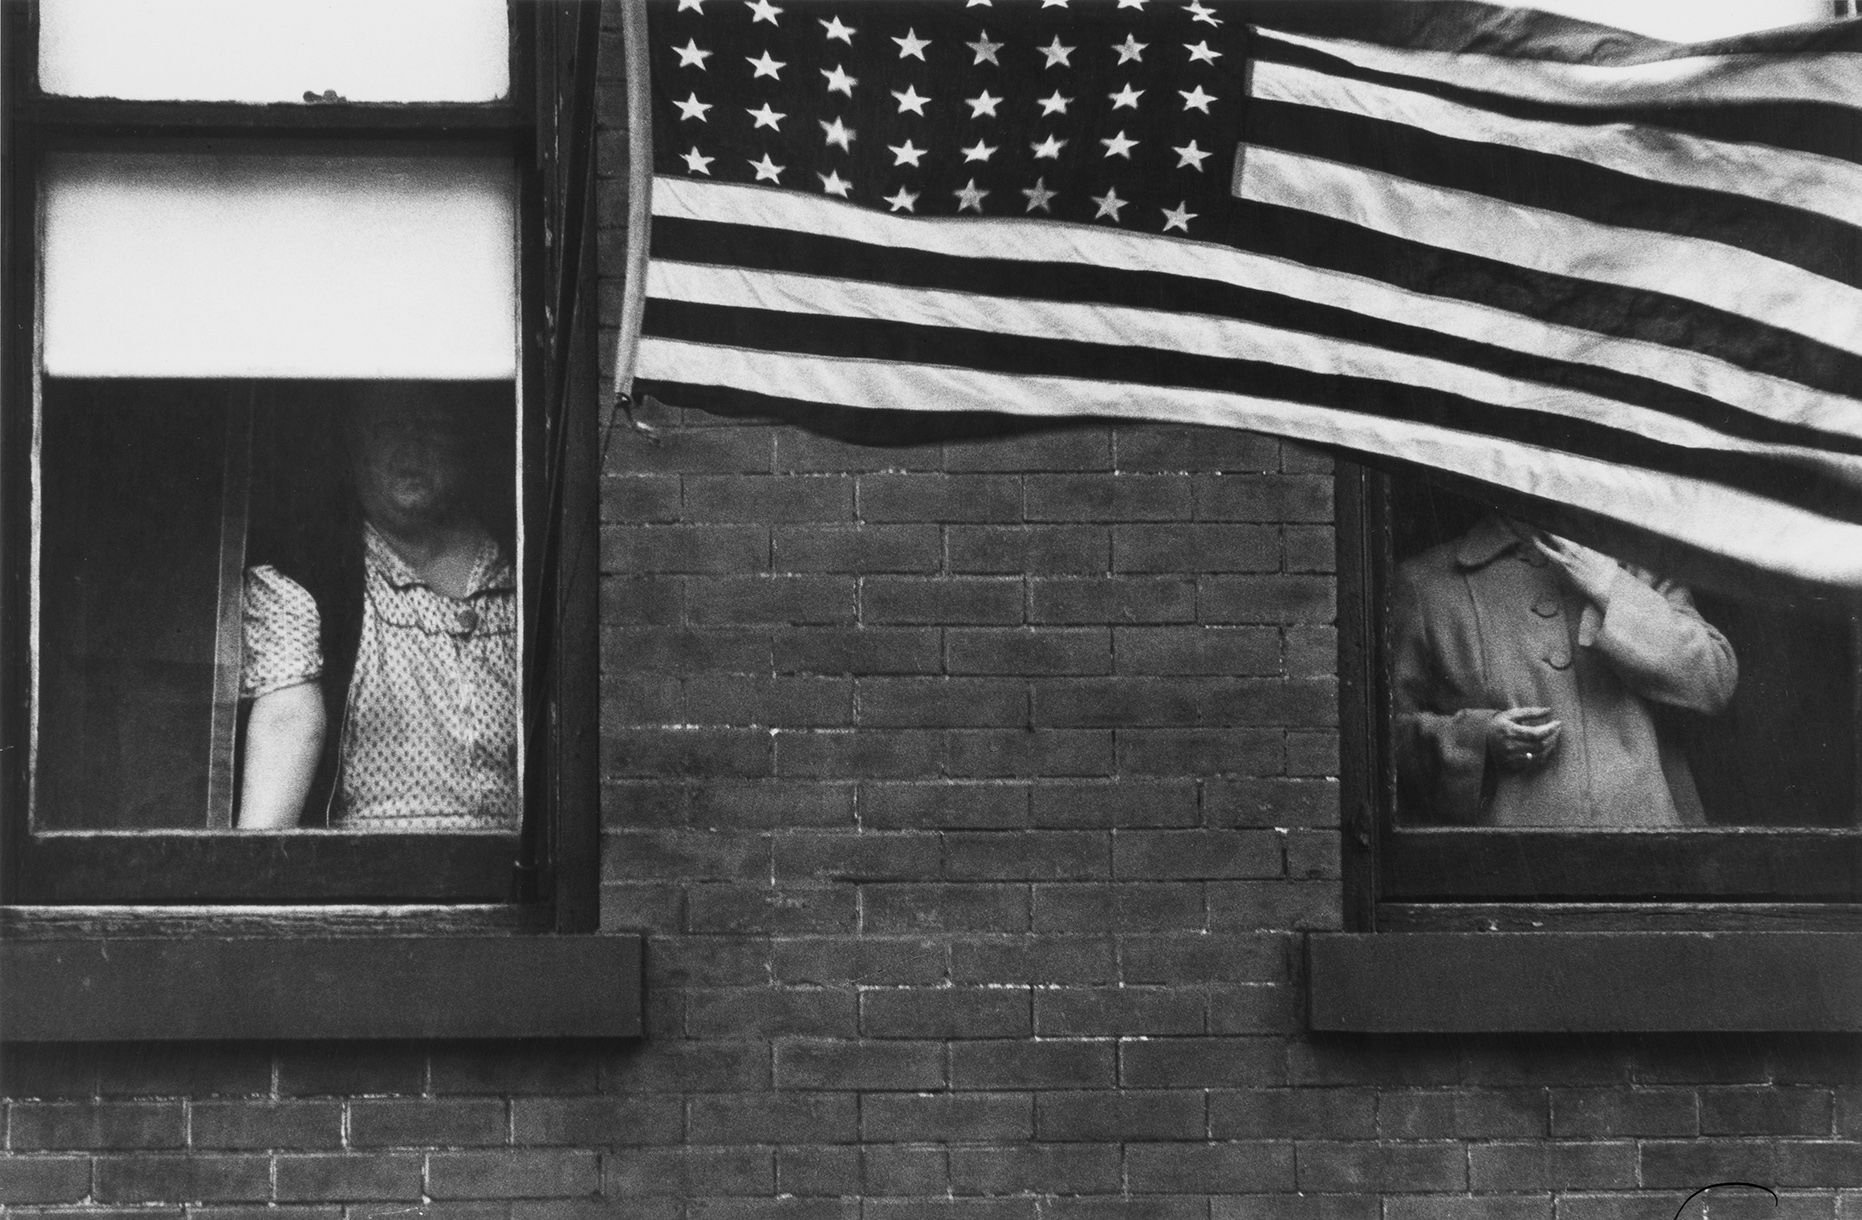 INTERVIEW: Robert Frank – “If An Artist Doesn’t Take Risks, Then It’s Not Worth It.” (2007)